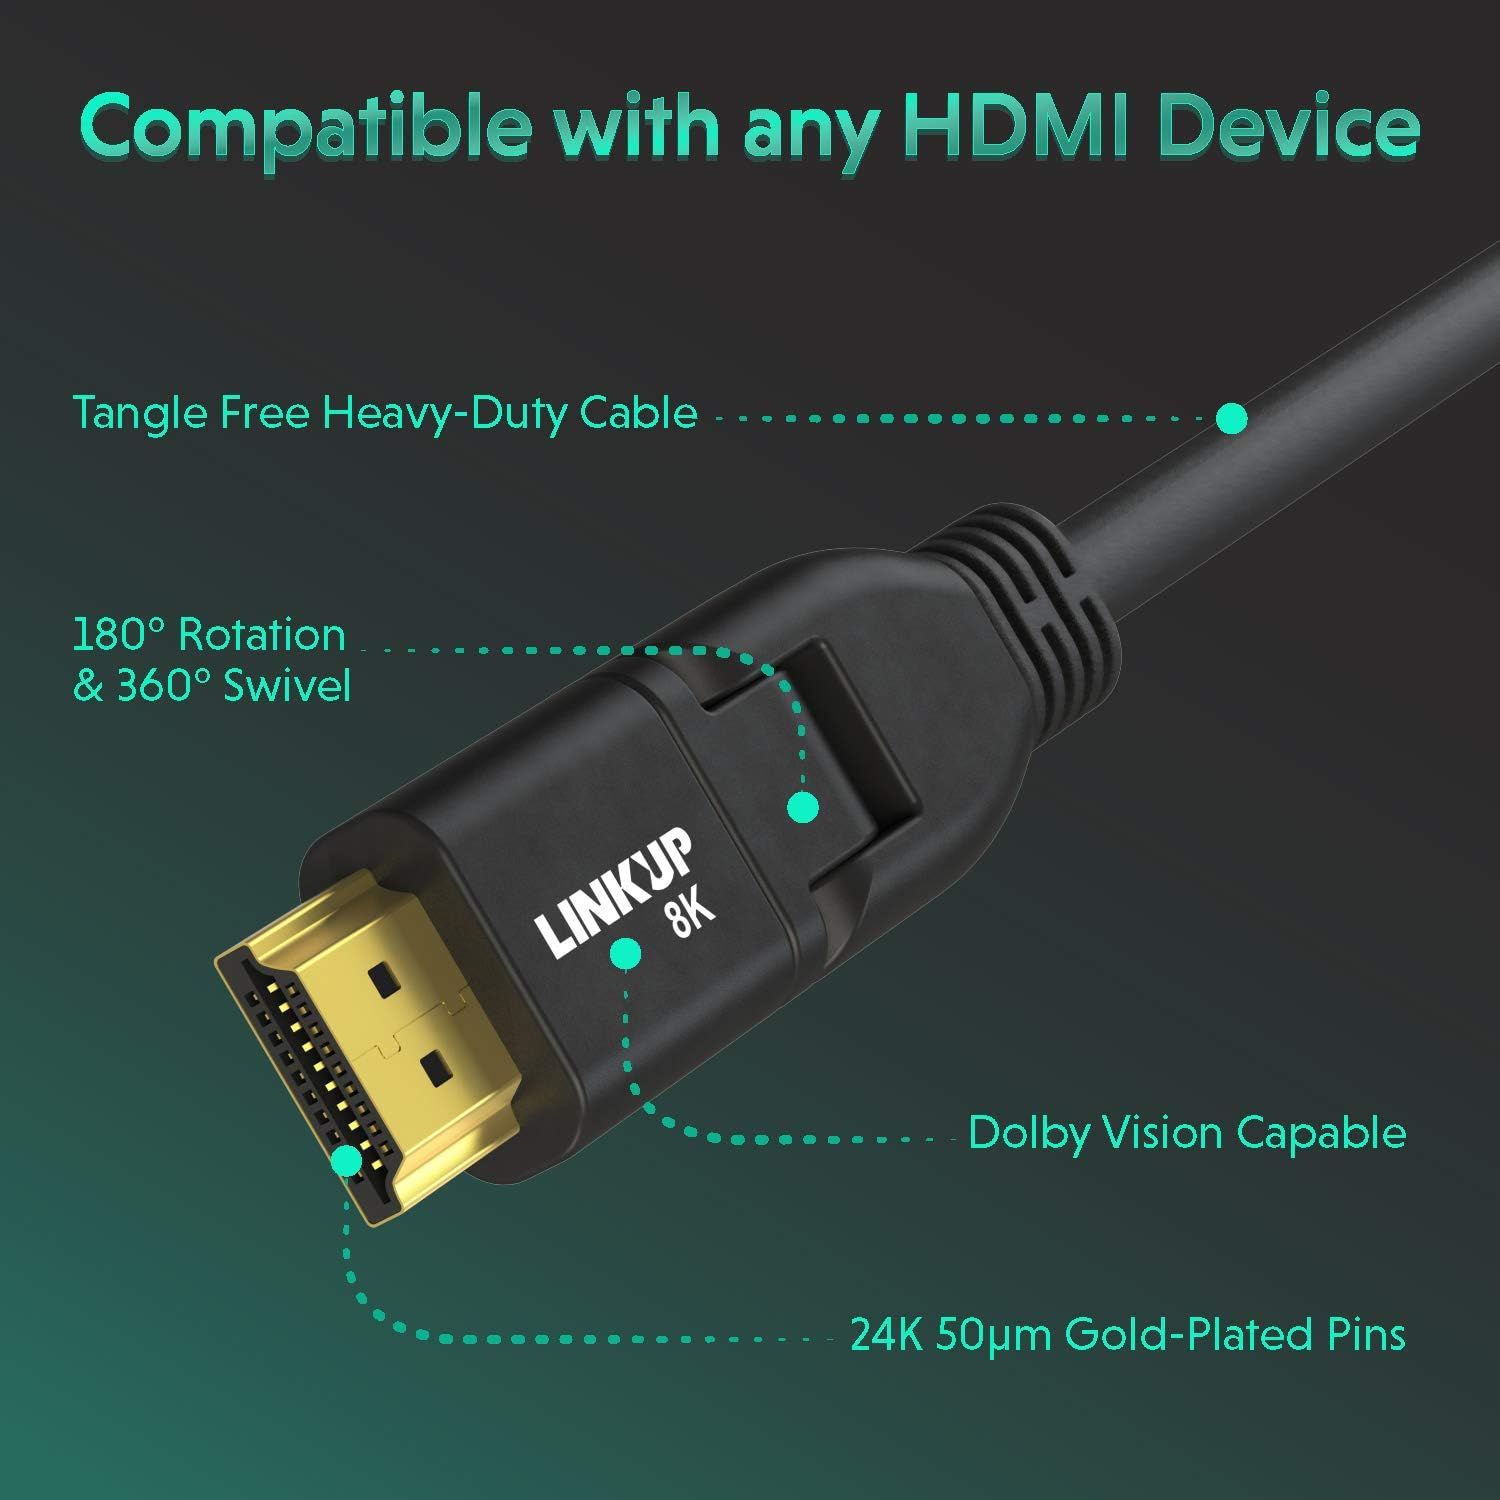 LINKUP Ultra High-Speed HDMI 2.1 8K Cable Specs